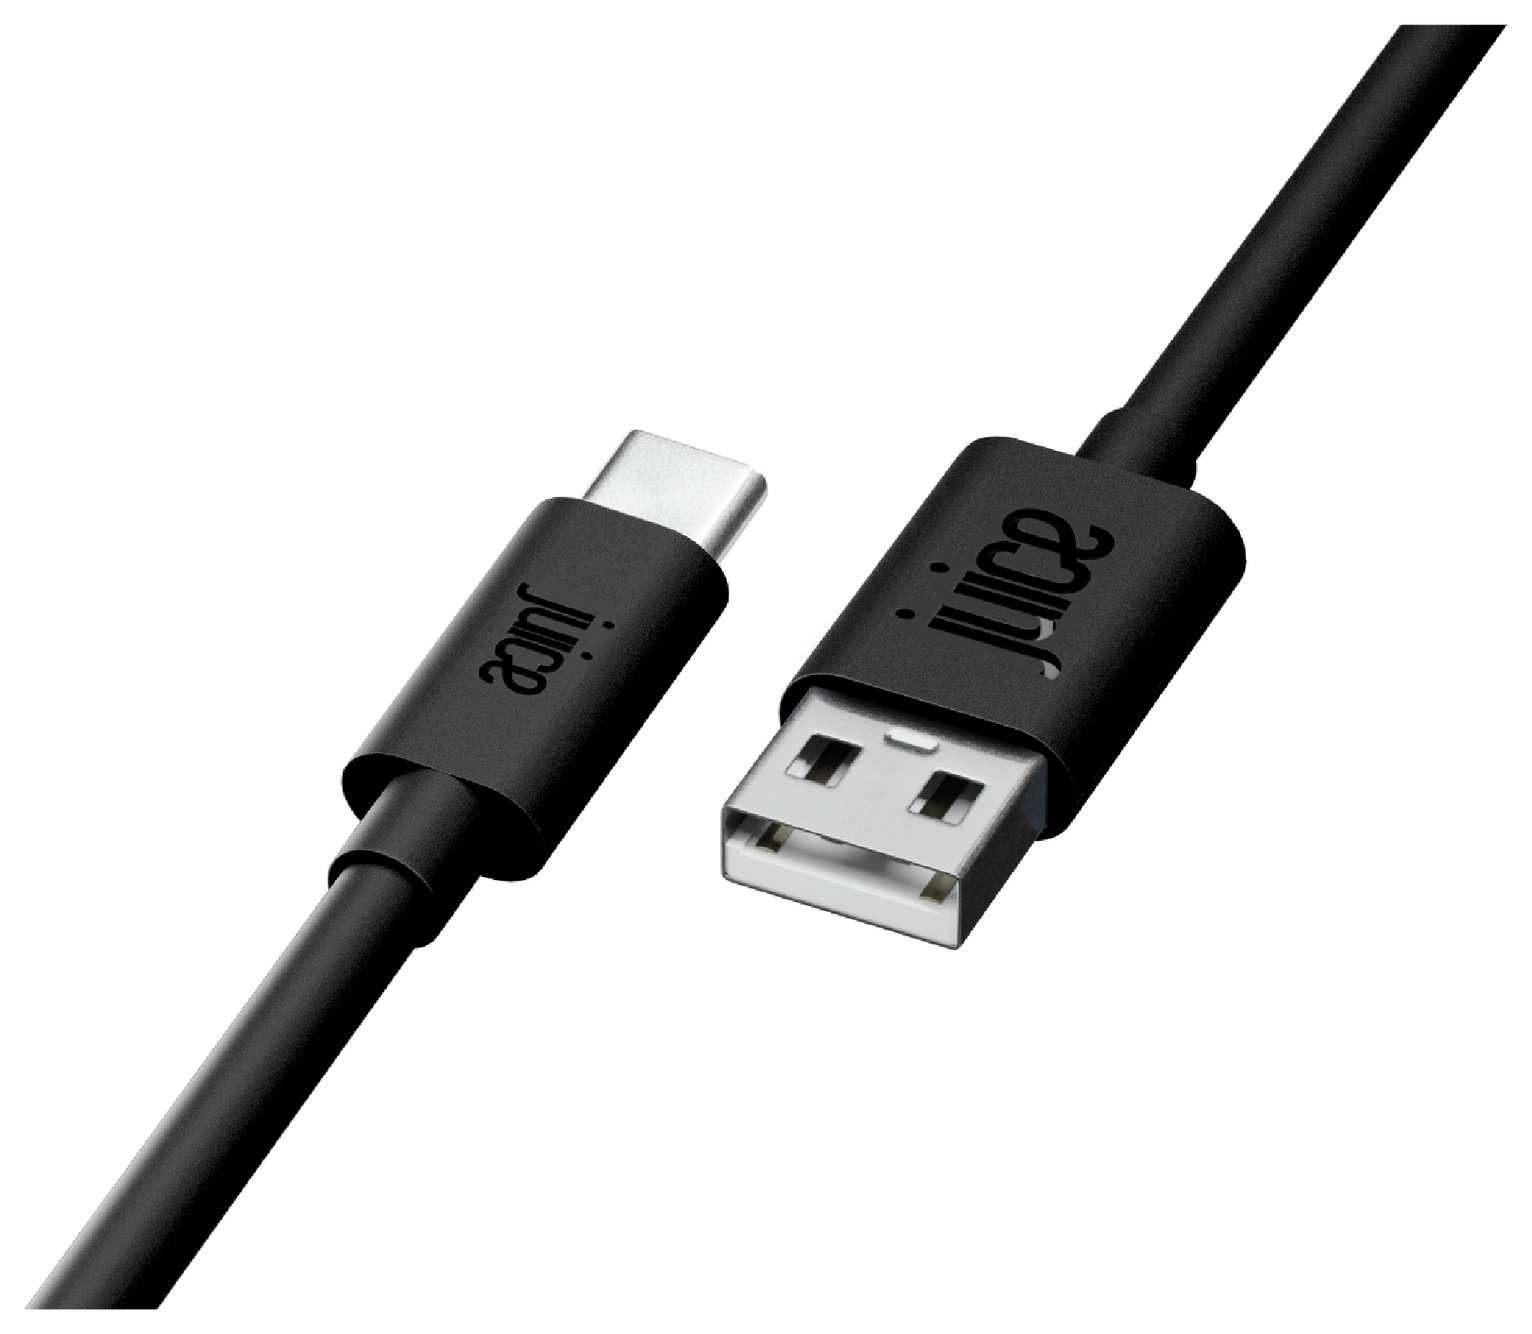 Juice USB to USB Type C 2m Charging Cable - Black